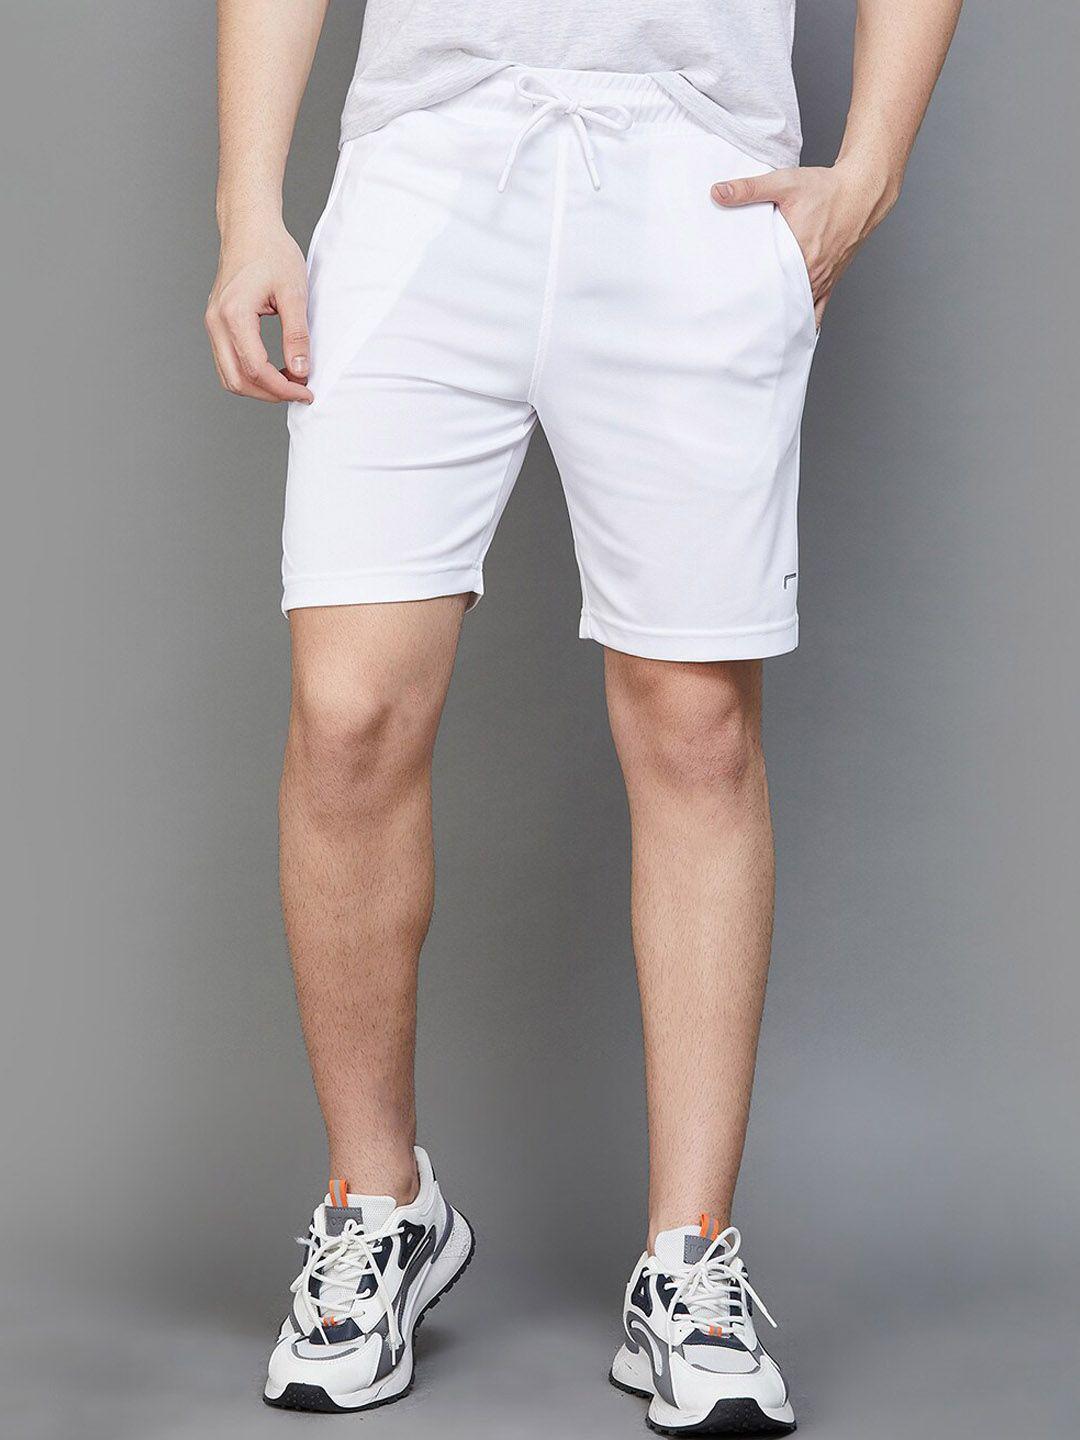 fame-forever-by-lifestyle-men-knee-length-gym-sports-shorts